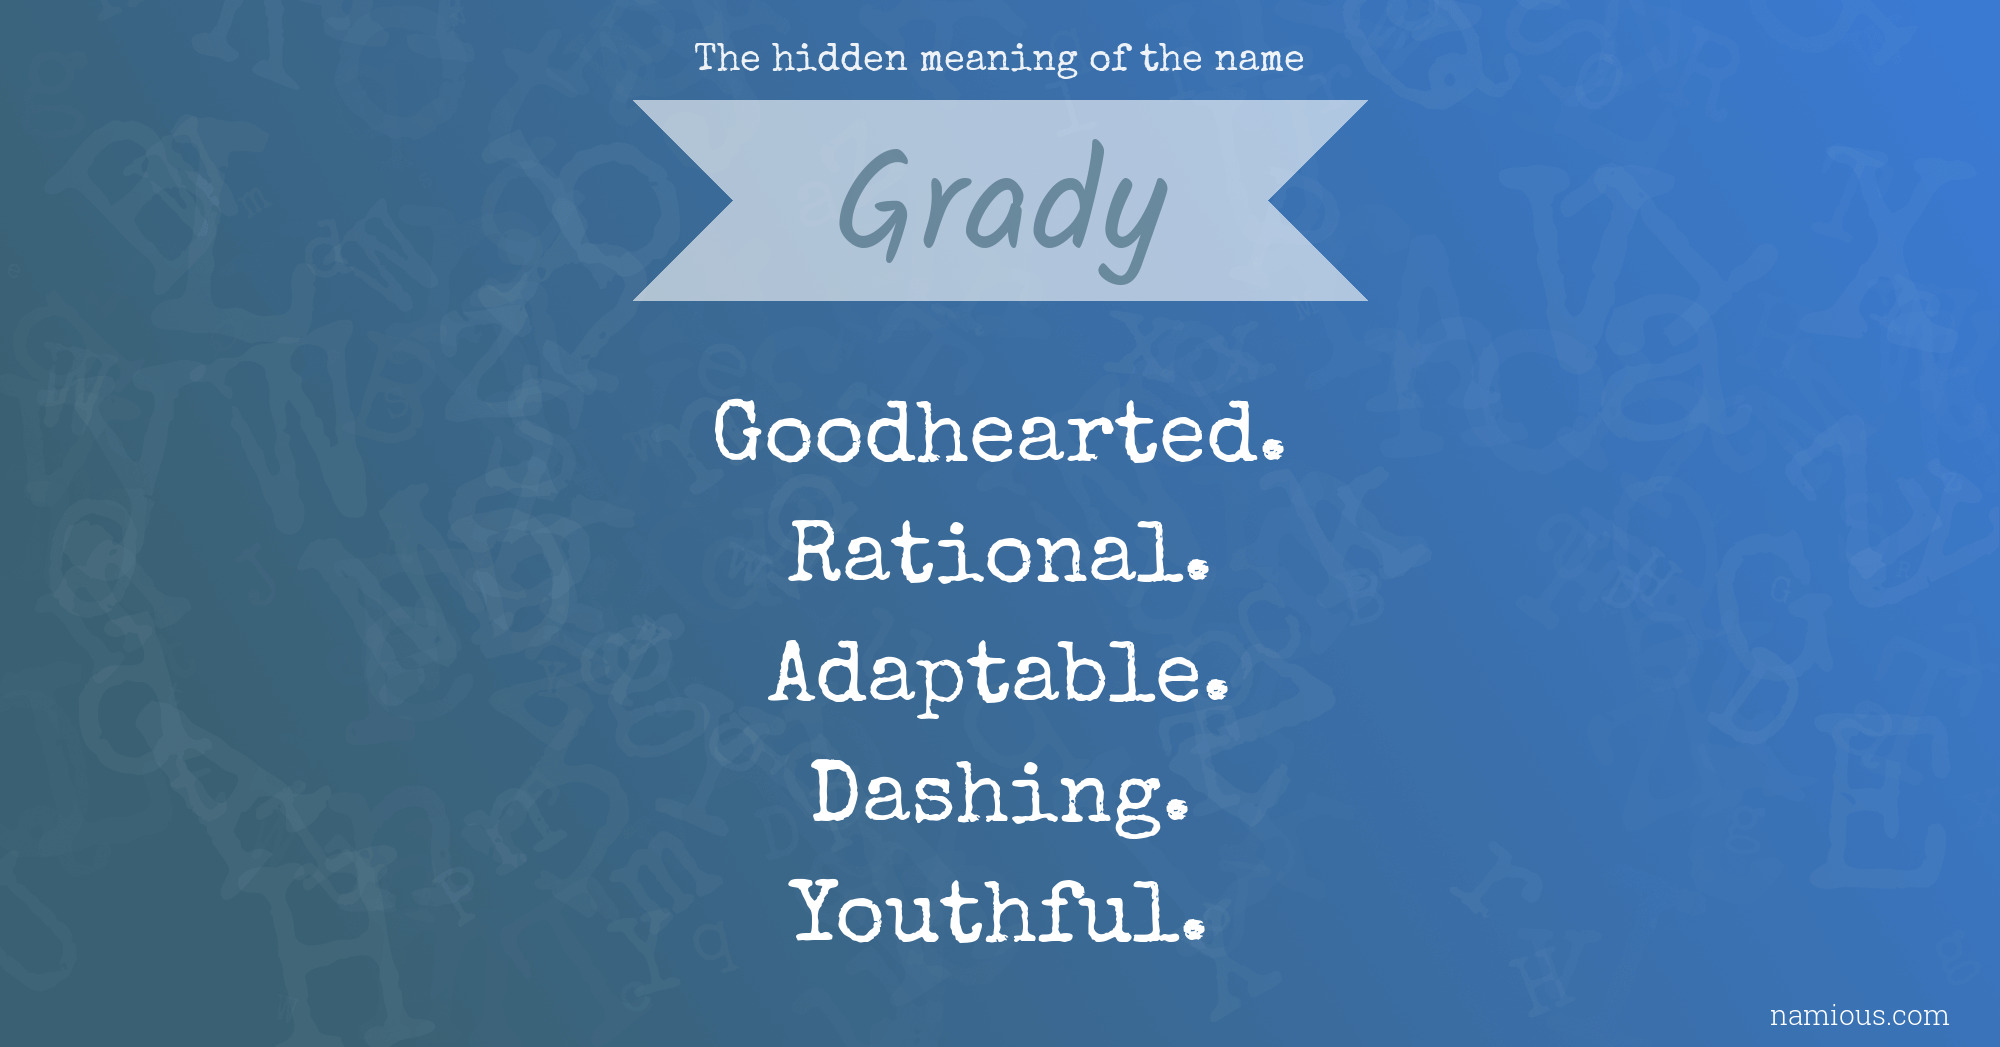 The hidden meaning of the name Grady